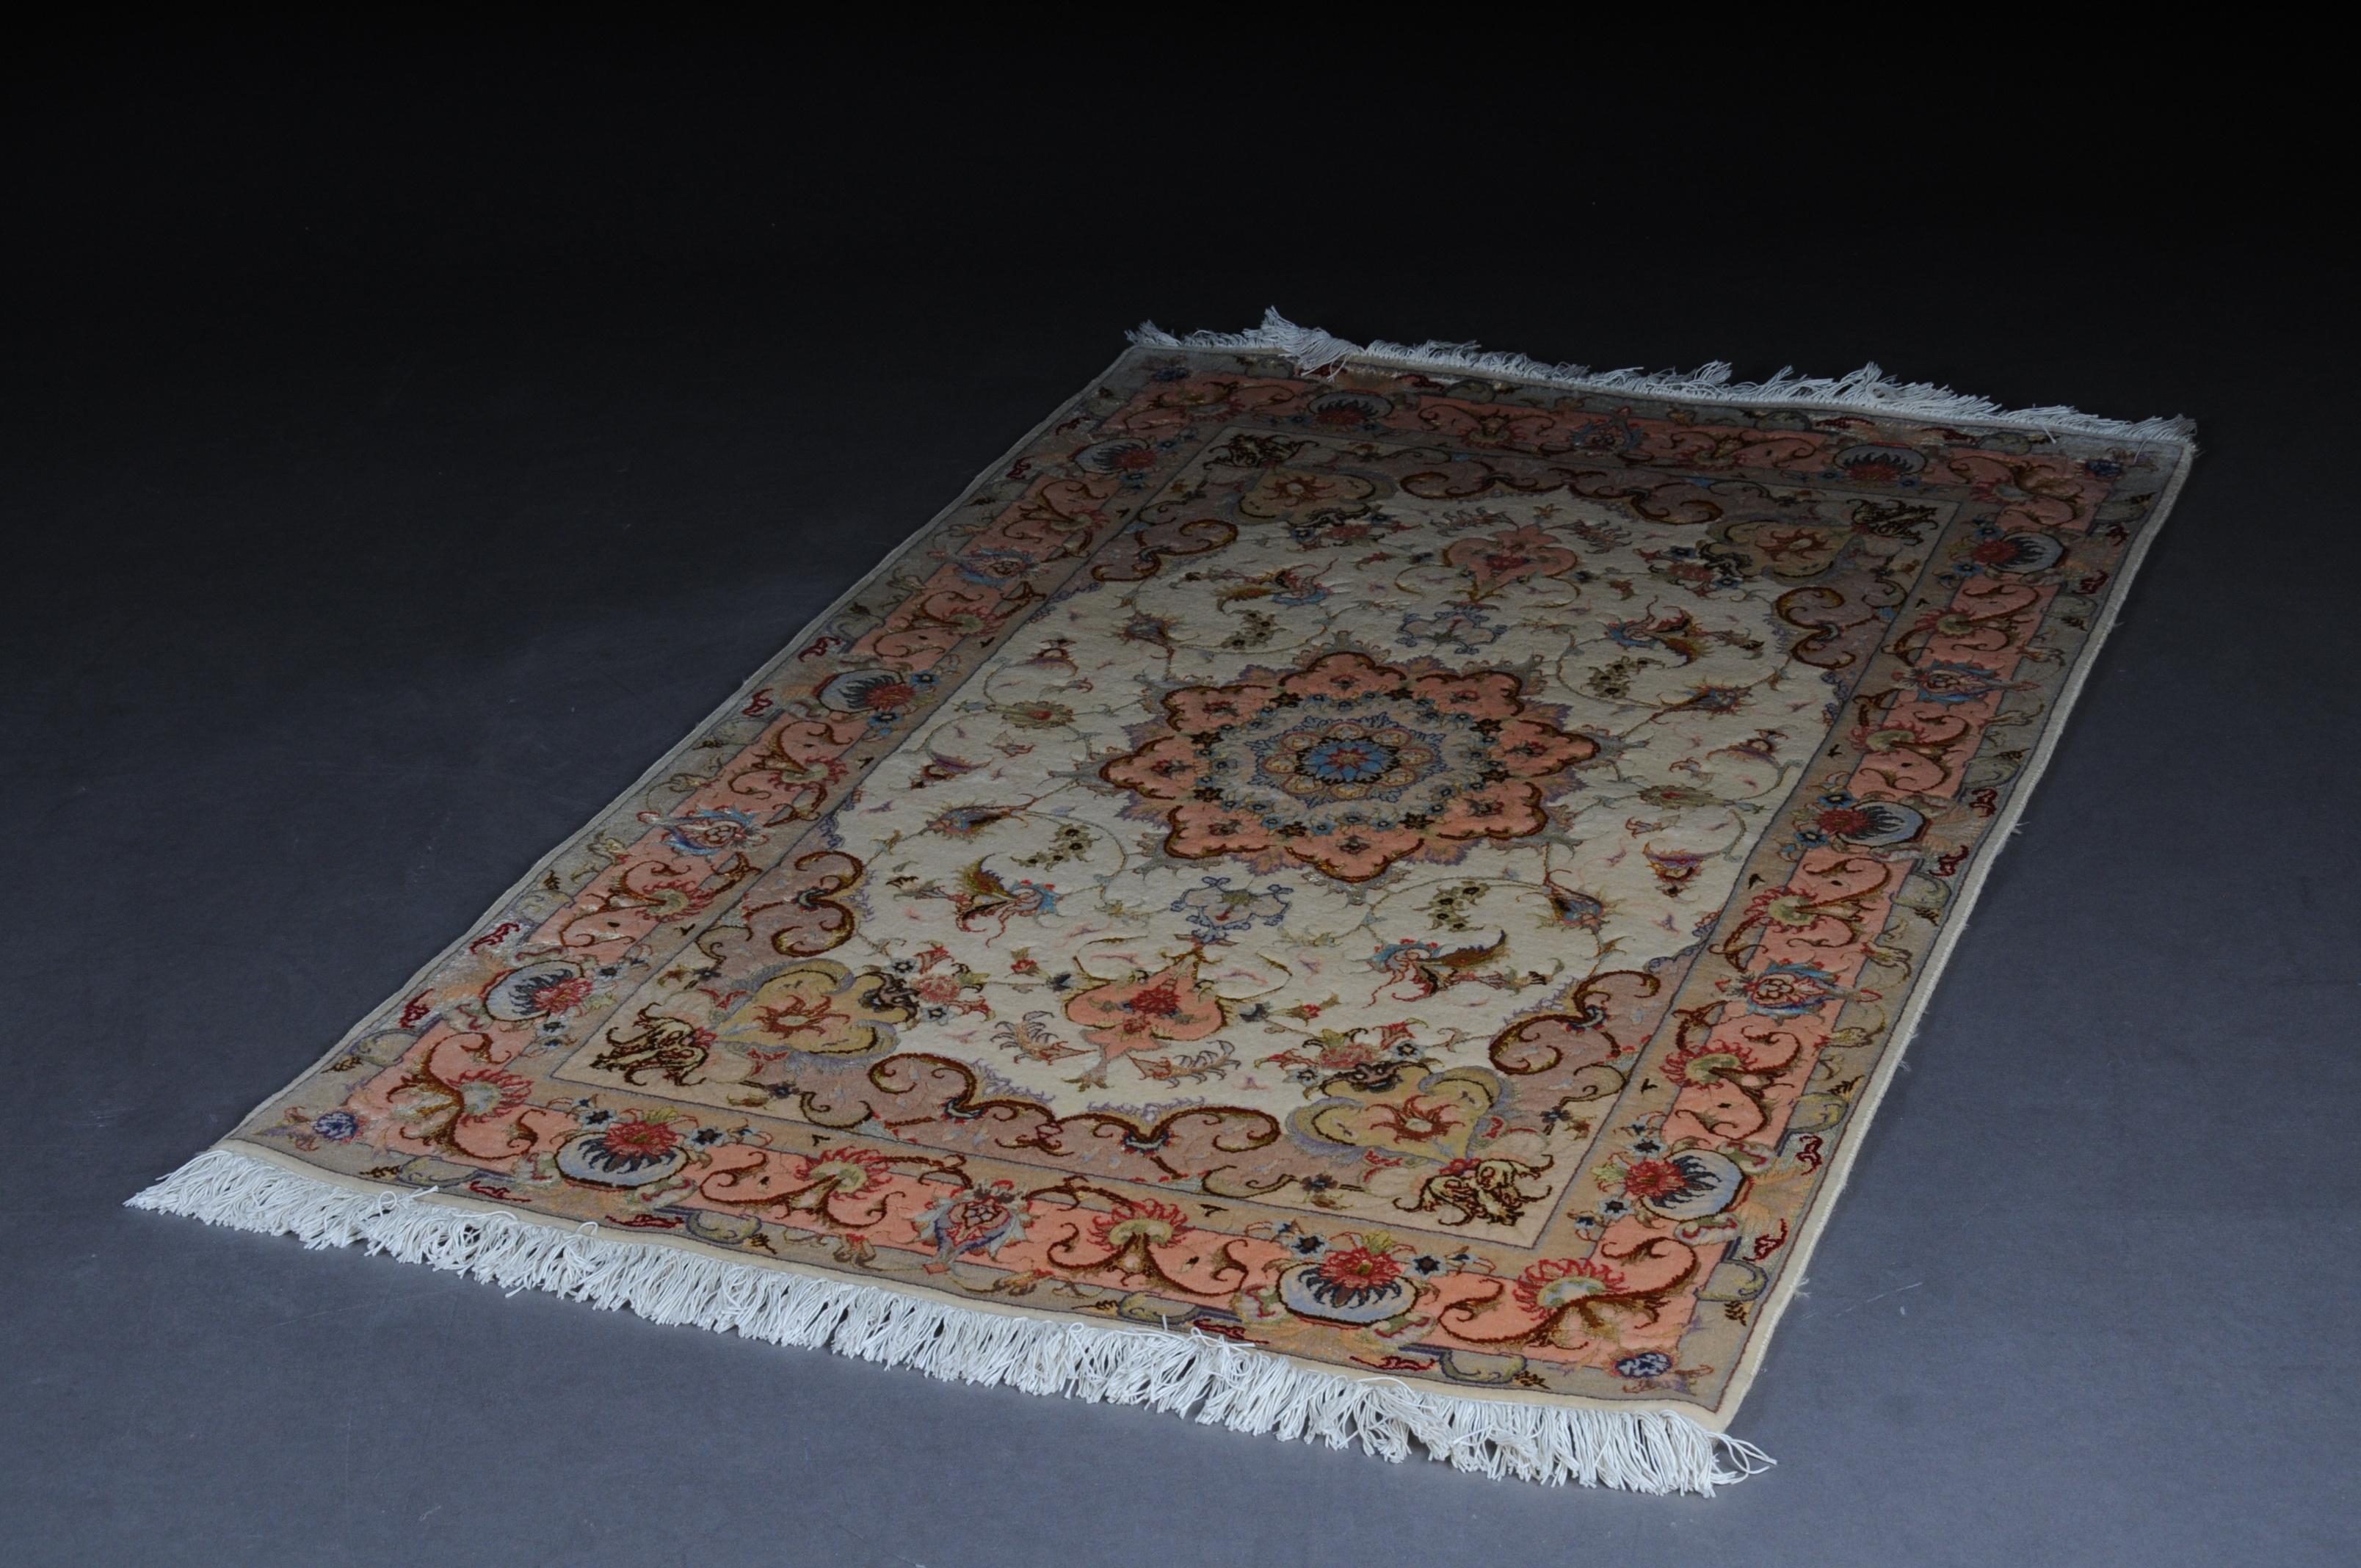 Fine Tabriz cork wool with silk, circa 1980, 160 x 100 cm

Finely woven Tabriz carpet with cork wool and silk. Symmetrically structured decors on a pastel colored background. A star-shaped mandala in the center. Recently professionally cleaned